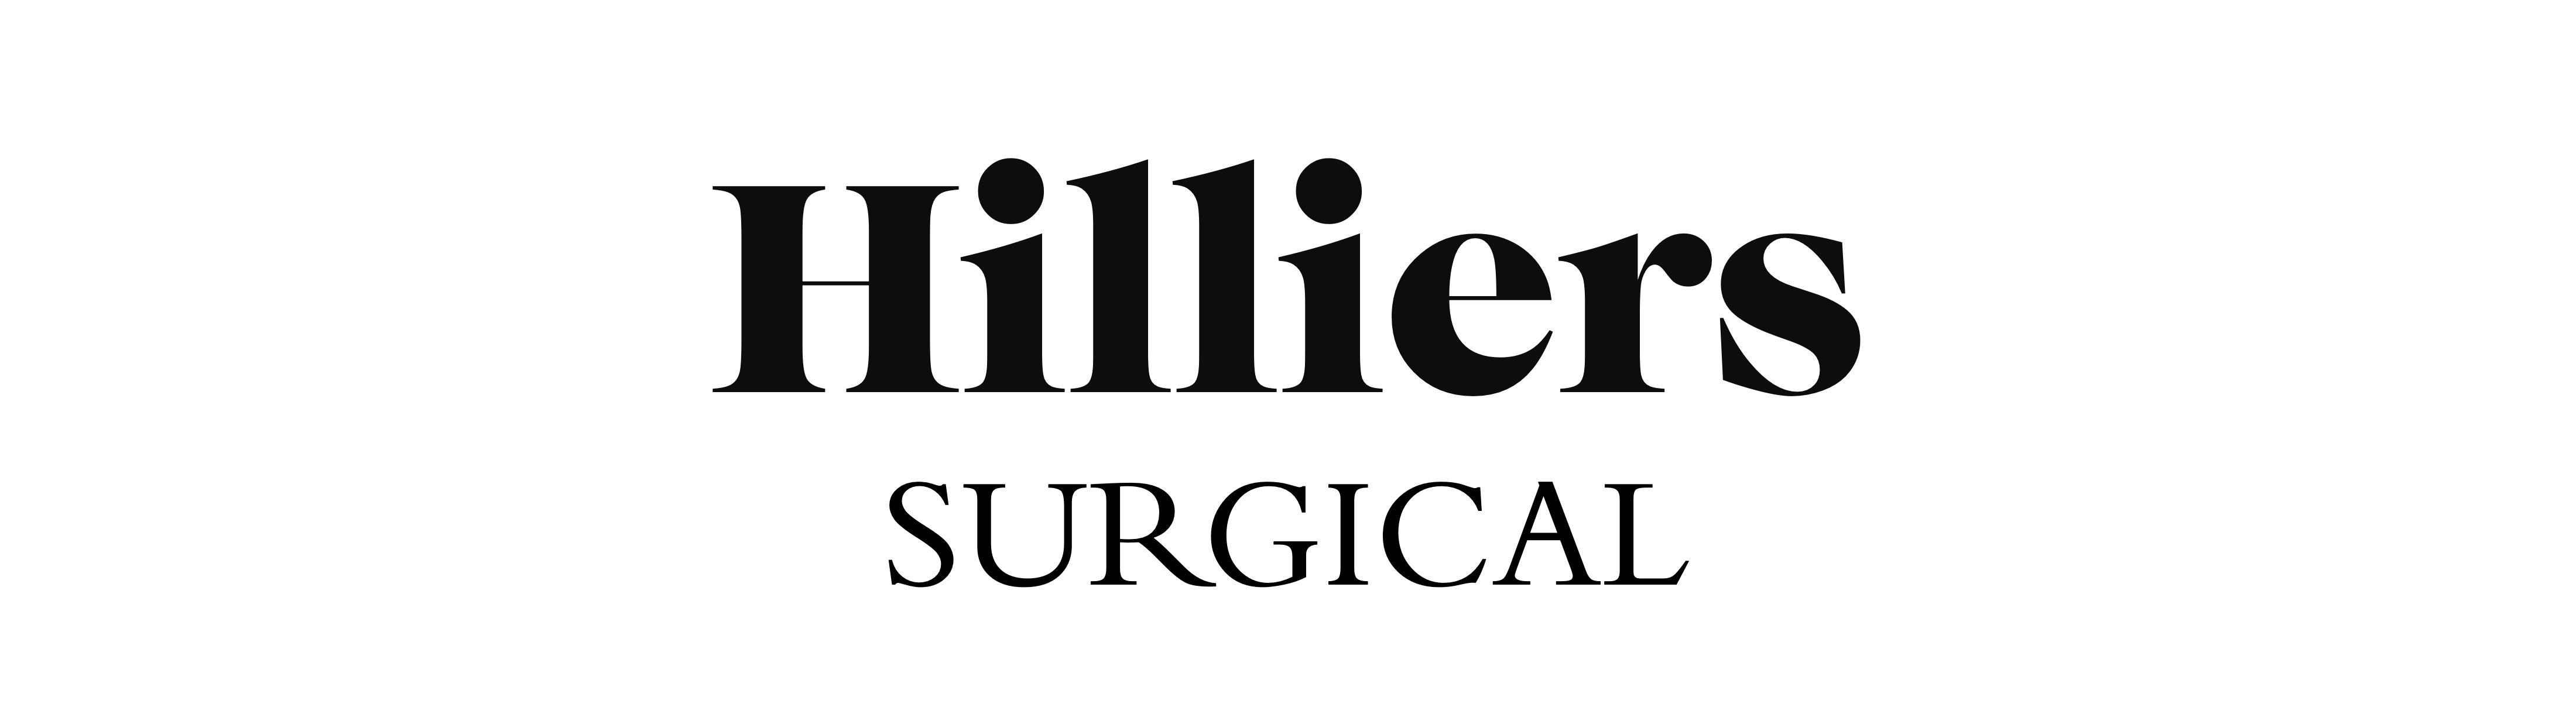 Hilliers Vision